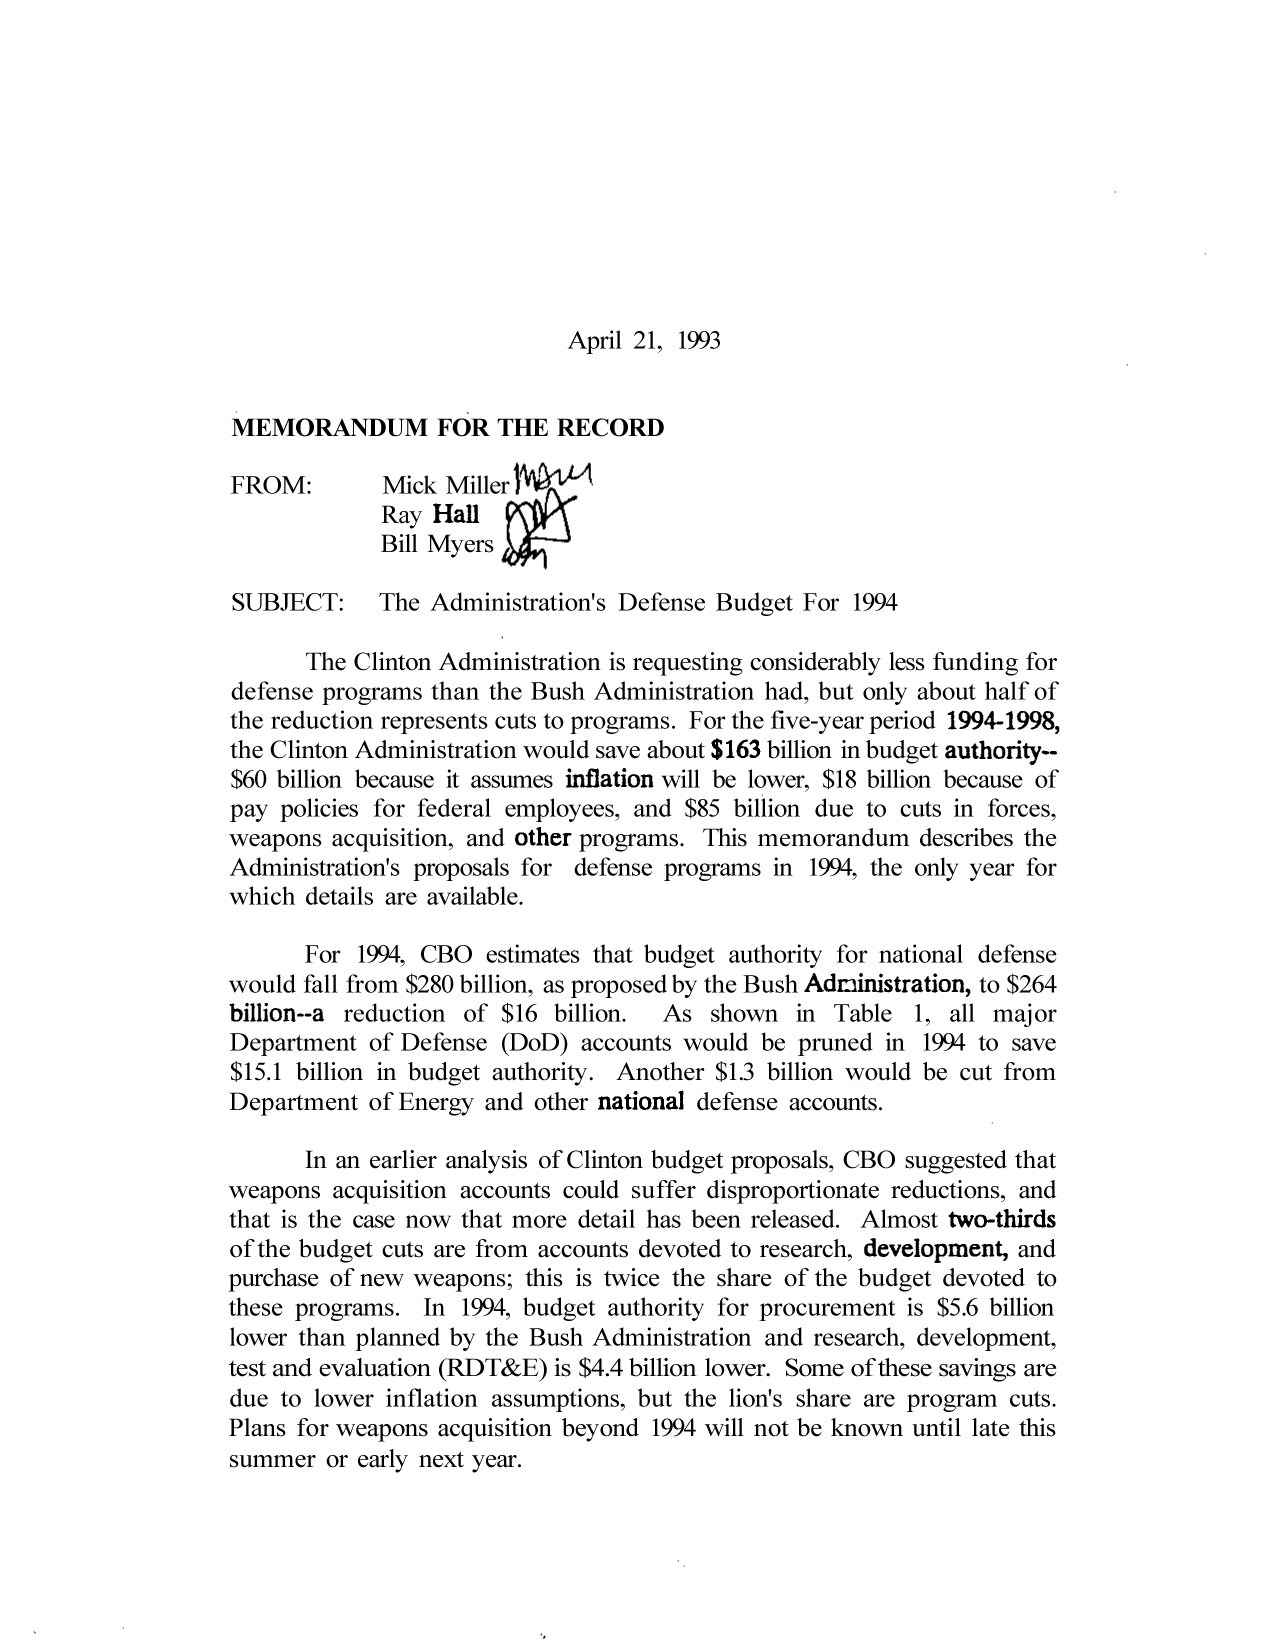 handle is hein.congrec/cbo9687 and id is 1 raw text is: April 21, 1993

MEMORANDUM FOR THE RECORD
FROM:       Mick Miller
Ray Hall
Bill Myers
SUBJECT:    The Administration's Defense Budget For 1994
The Clinton Administration is requesting considerably less funding for
defense programs than the Bush Administration had, but only about half of
the reduction represents cuts to programs. For the five-year period 1994-1998,
the Clinton Administration would save about $163 billion in budget authority--
$60 billion because it assumes inflation will be lower, $18 billion because of
pay policies for federal employees, and $85 billion due to cuts in forces,
weapons acquisition, and other programs. This memorandum describes the
Administration's proposals for defense programs in 1994, the only year for
which details are available.
For 1994, CBO estimates that budget authority for national defense
would fall from $280 billion, as proposed by the Bush Administration, to $264
billion--a reduction of $16 billion.  As shown in Table 1, all major
Department of Defense (DoD) accounts would be pruned in 1994 to save
$15.1 billion in budget authority. Another $1.3 billion would be cut from
Department of Energy and other national defense accounts.
In an earlier analysis of Clinton budget proposals, CBO suggested that
weapons acquisition accounts could suffer disproportionate reductions, and
that is the case now that more detail has been released. Almost two-thirds
of the budget cuts are from accounts devoted to research, development, and
purchase of new weapons; this is twice the share of the budget devoted to
these programs. In 1994, budget authority for procurement is $5.6 billion
lower than planned by the Bush Administration and research, development,
test and evaluation (RDT&E) is $4.4 billion lower. Some of these savings are
due to lower inflation assumptions, but the lion's share are program cuts.
Plans for weapons acquisition beyond 1994 will not be known until late this
summer or early next year.


